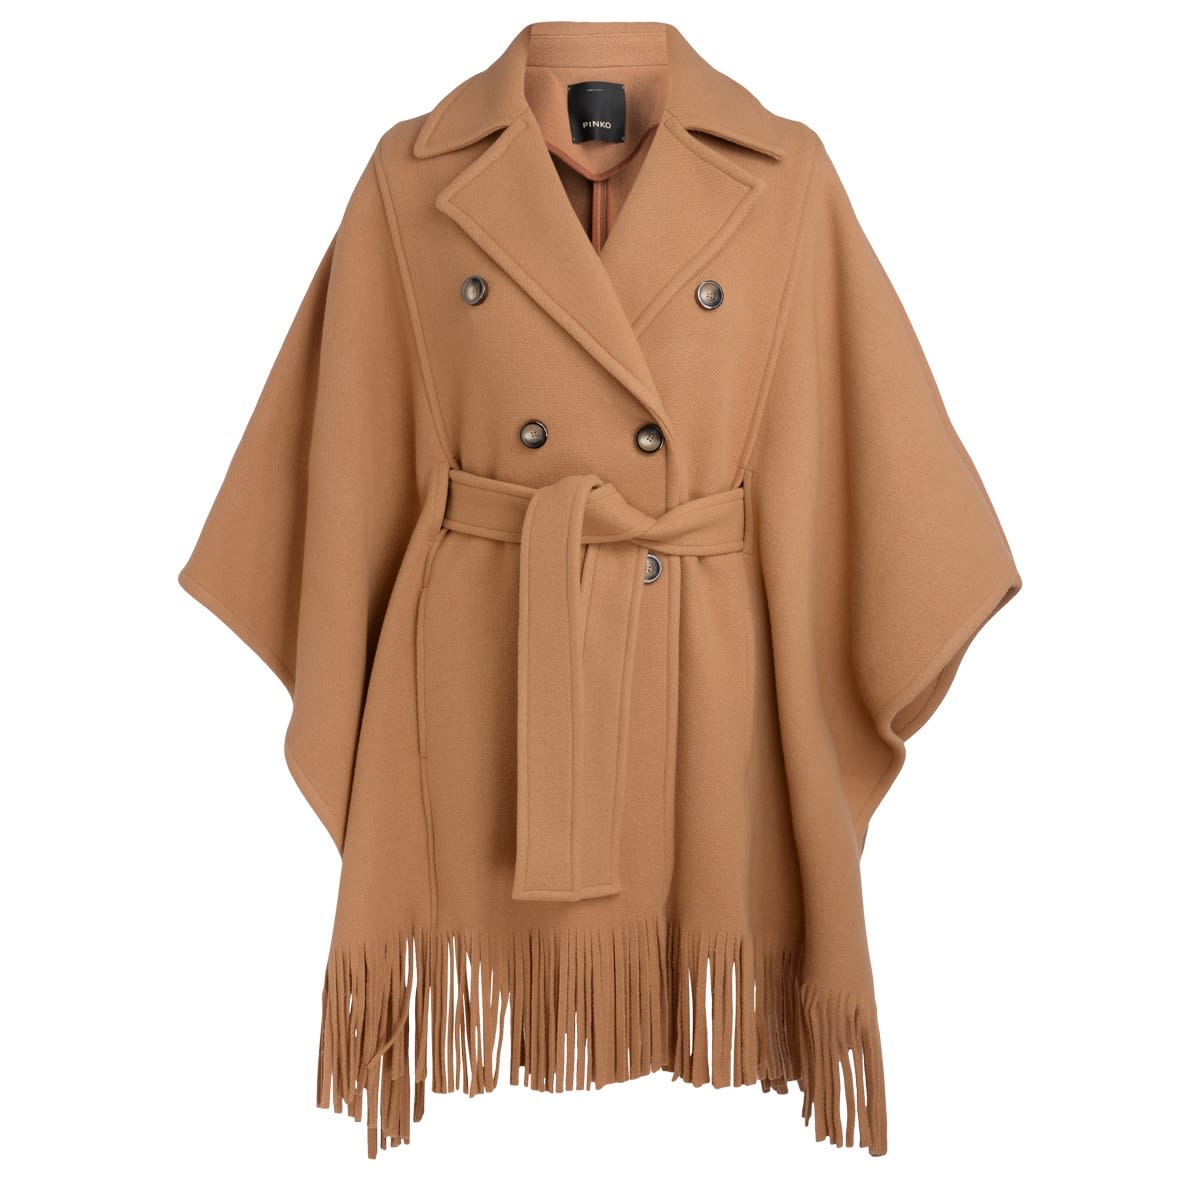 Pinko Cape Coat In Camel Colour With Fringes